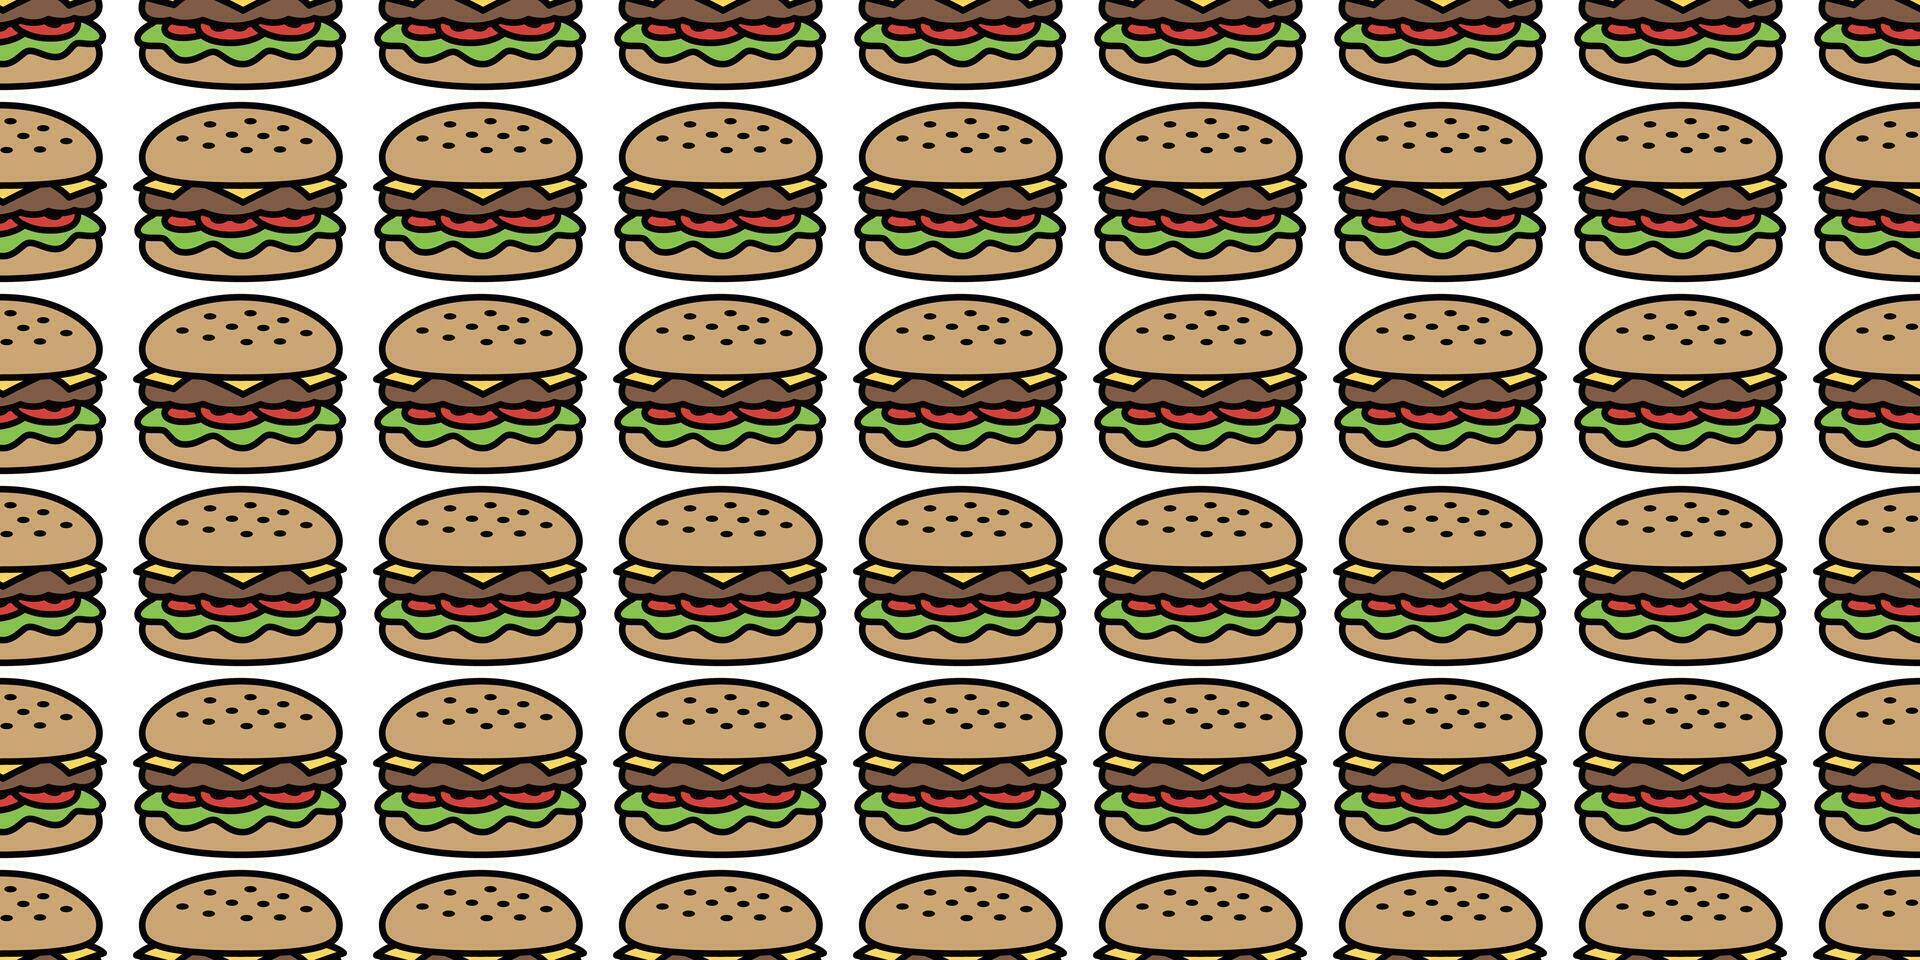 hamburger seamless pattern fast food vector bakery baked meat icon restaurant repeat wallpaper scarf isolated cartoon tile background doodle illustration design